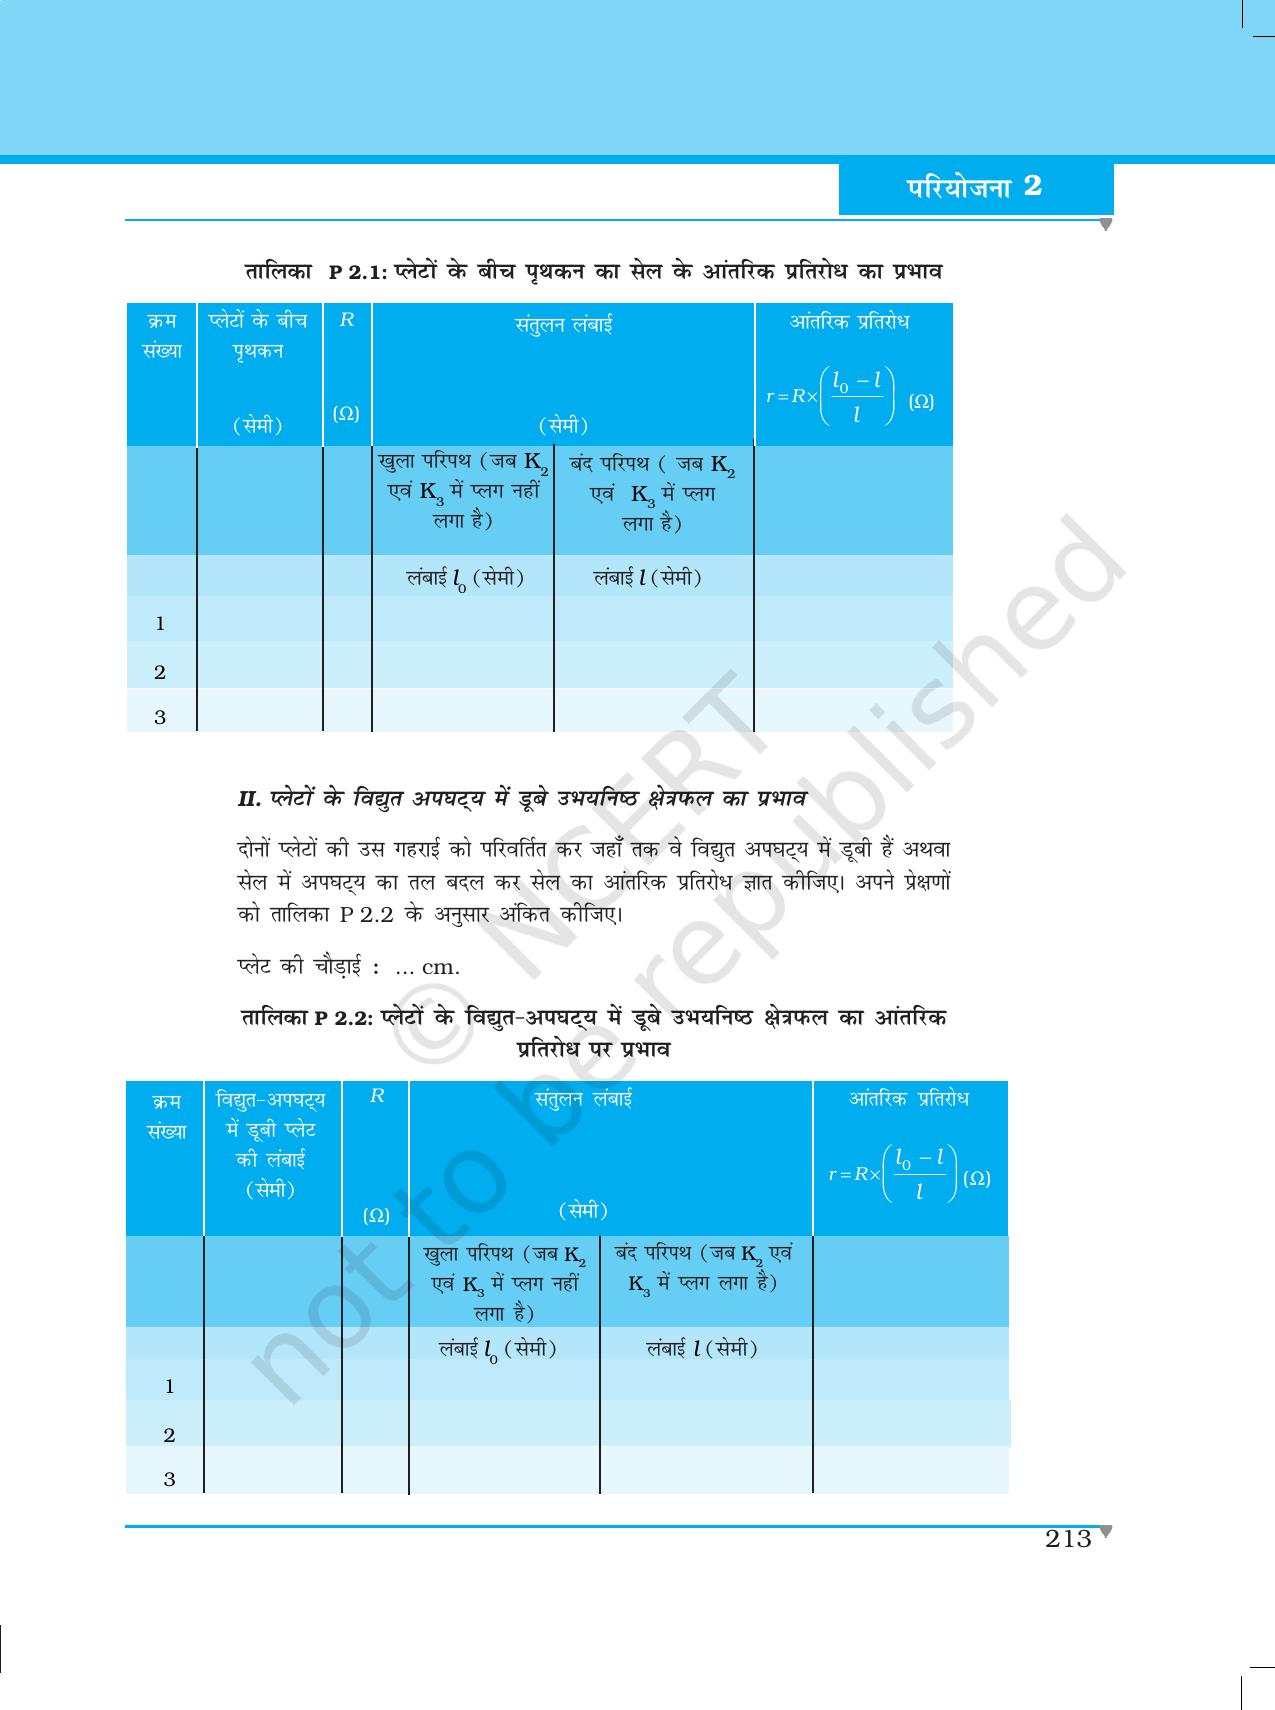 NCERT Laboratory Manuals for Class XII भौतिकी - परियोजना (1 - 7) - Page 7